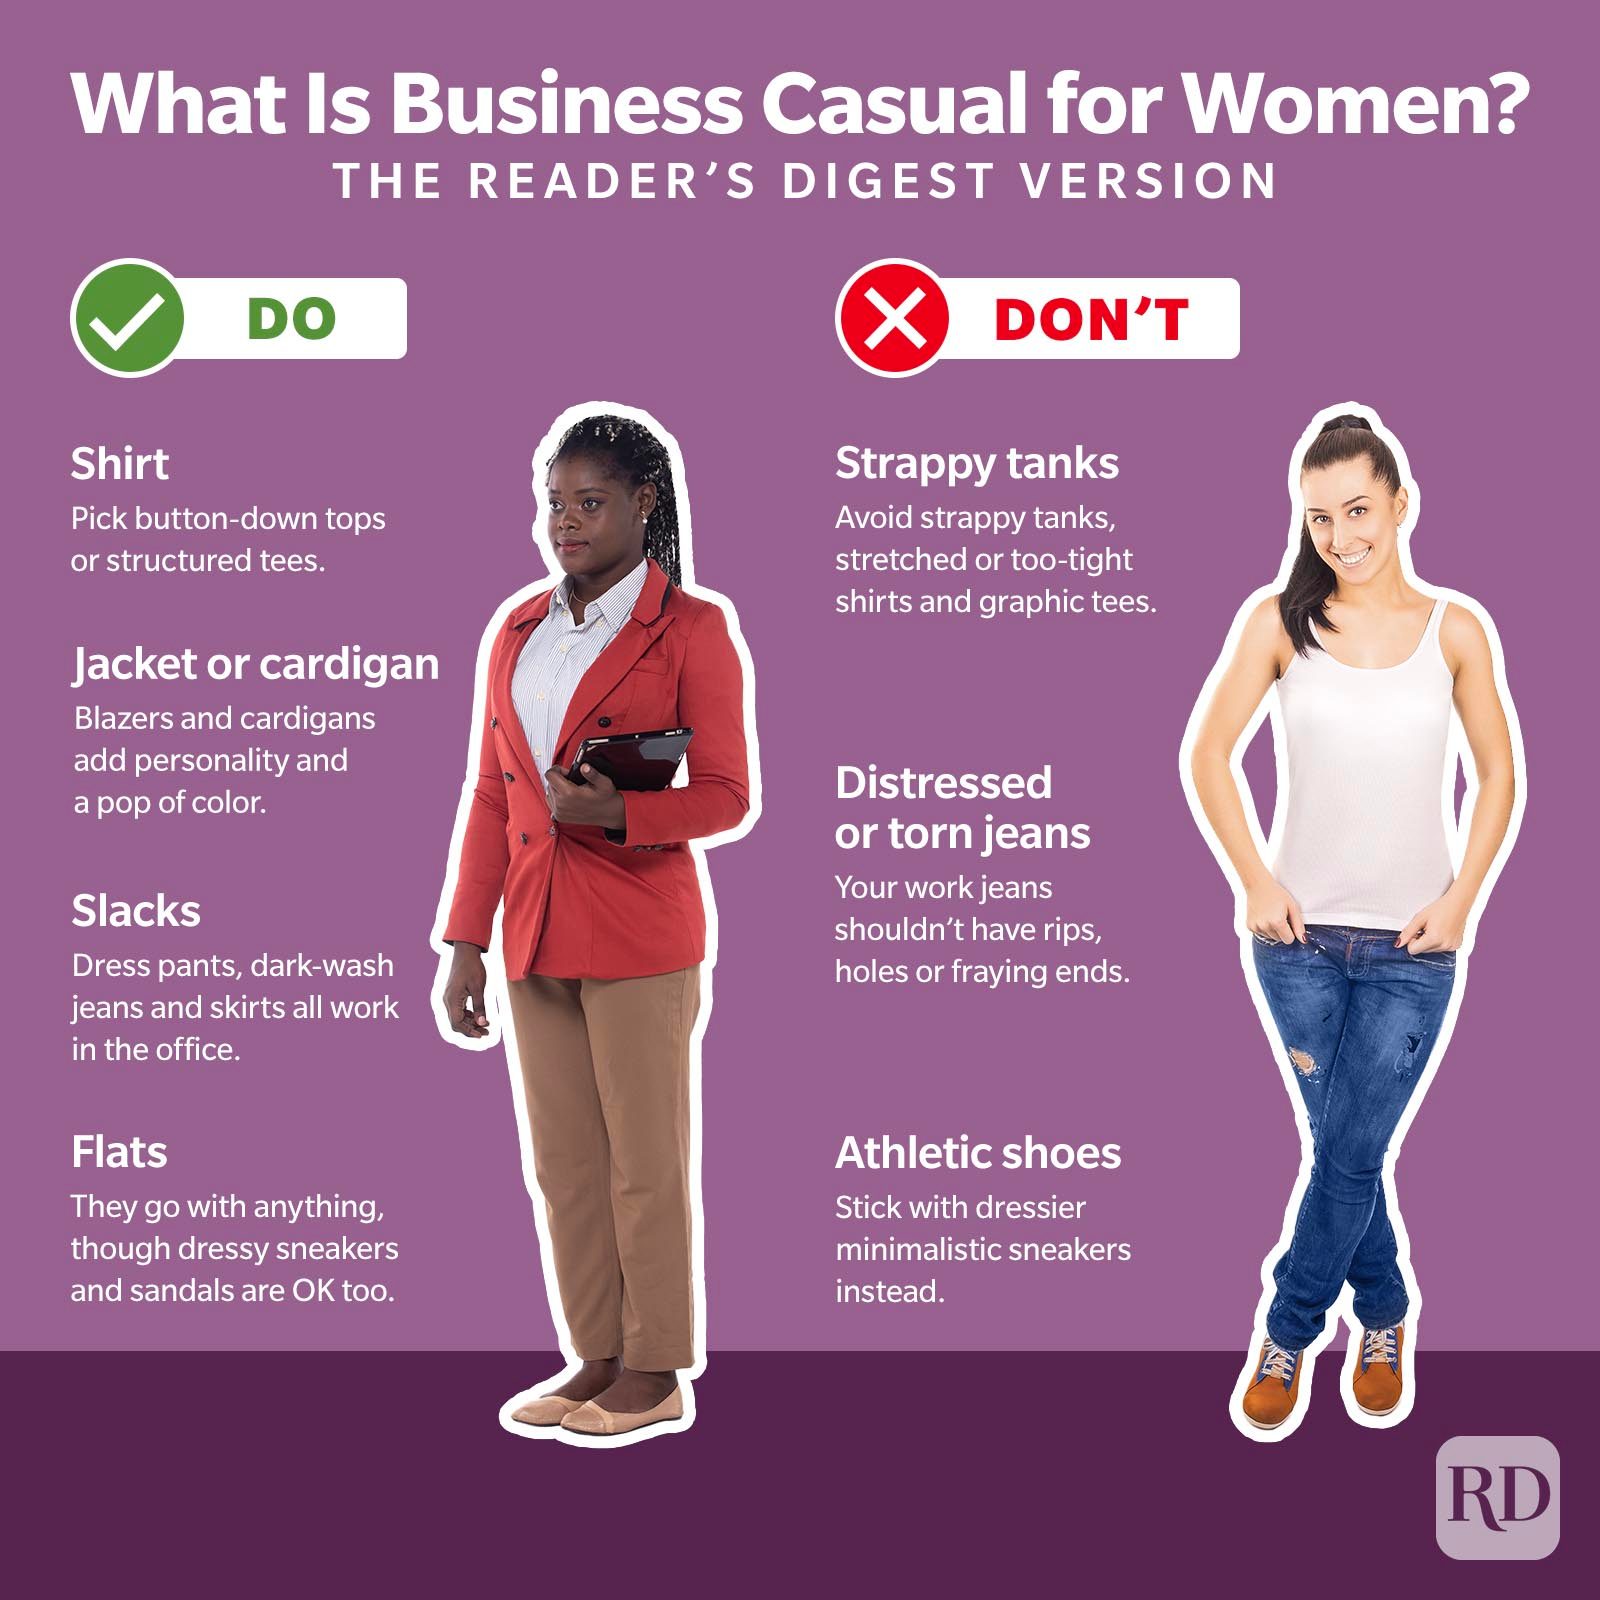 What Is Business Casual? Fashion Experts Explain How to Dress for